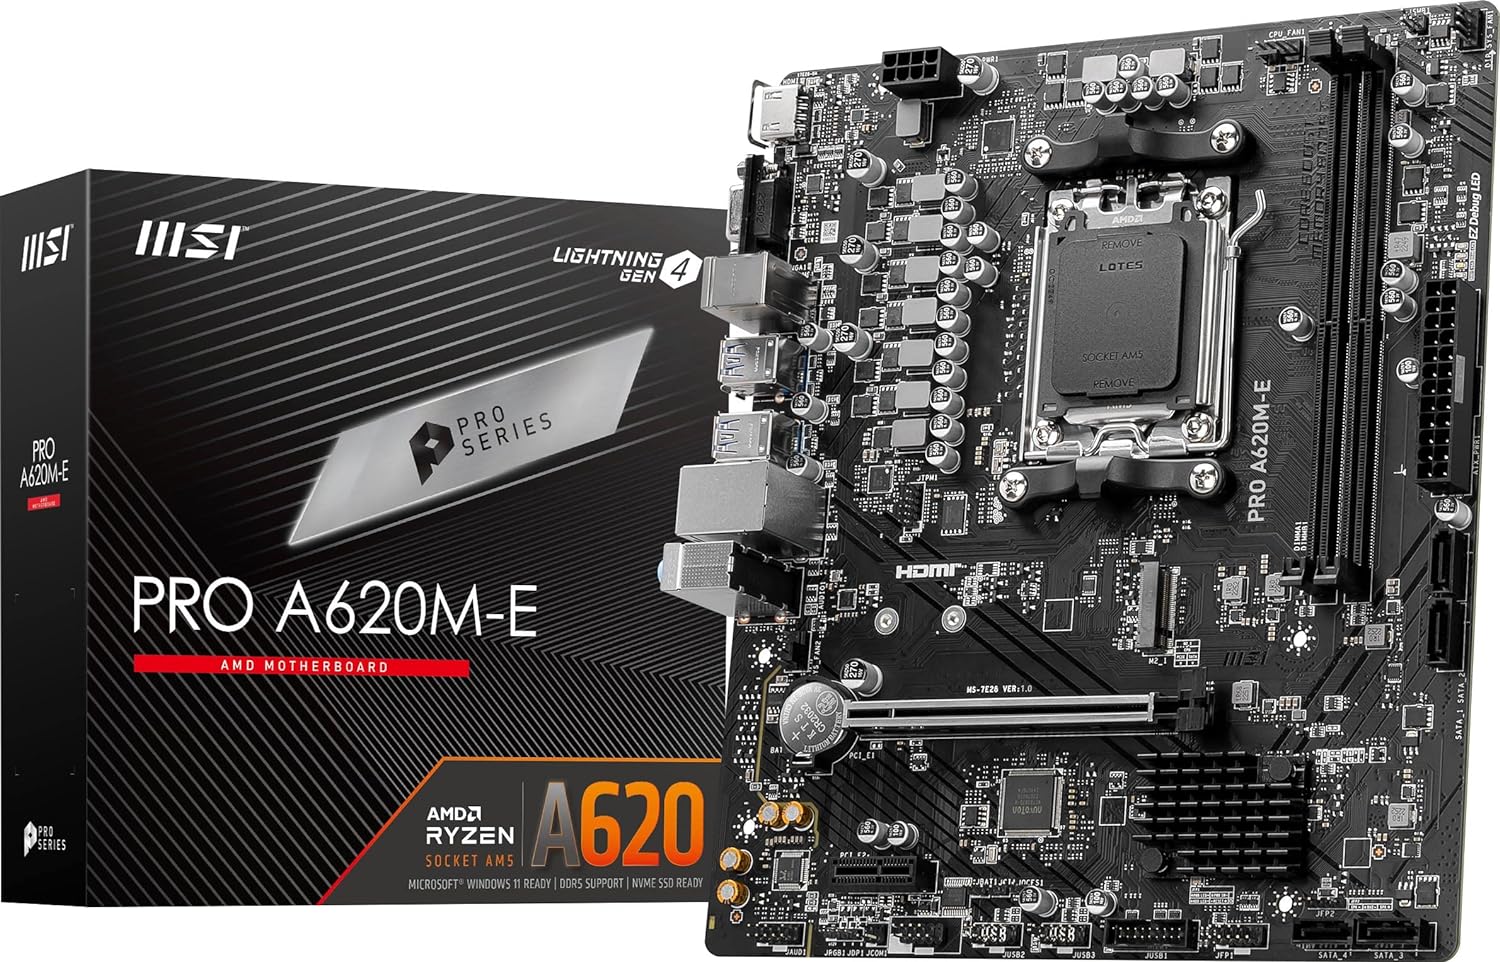 MSI PRO A620M-E ProSeries Motherboard - Supports AMD Ryzen 7000 Series Desktop Processors, DDR5 Memory, and PCIe 4.0. 0824142322406